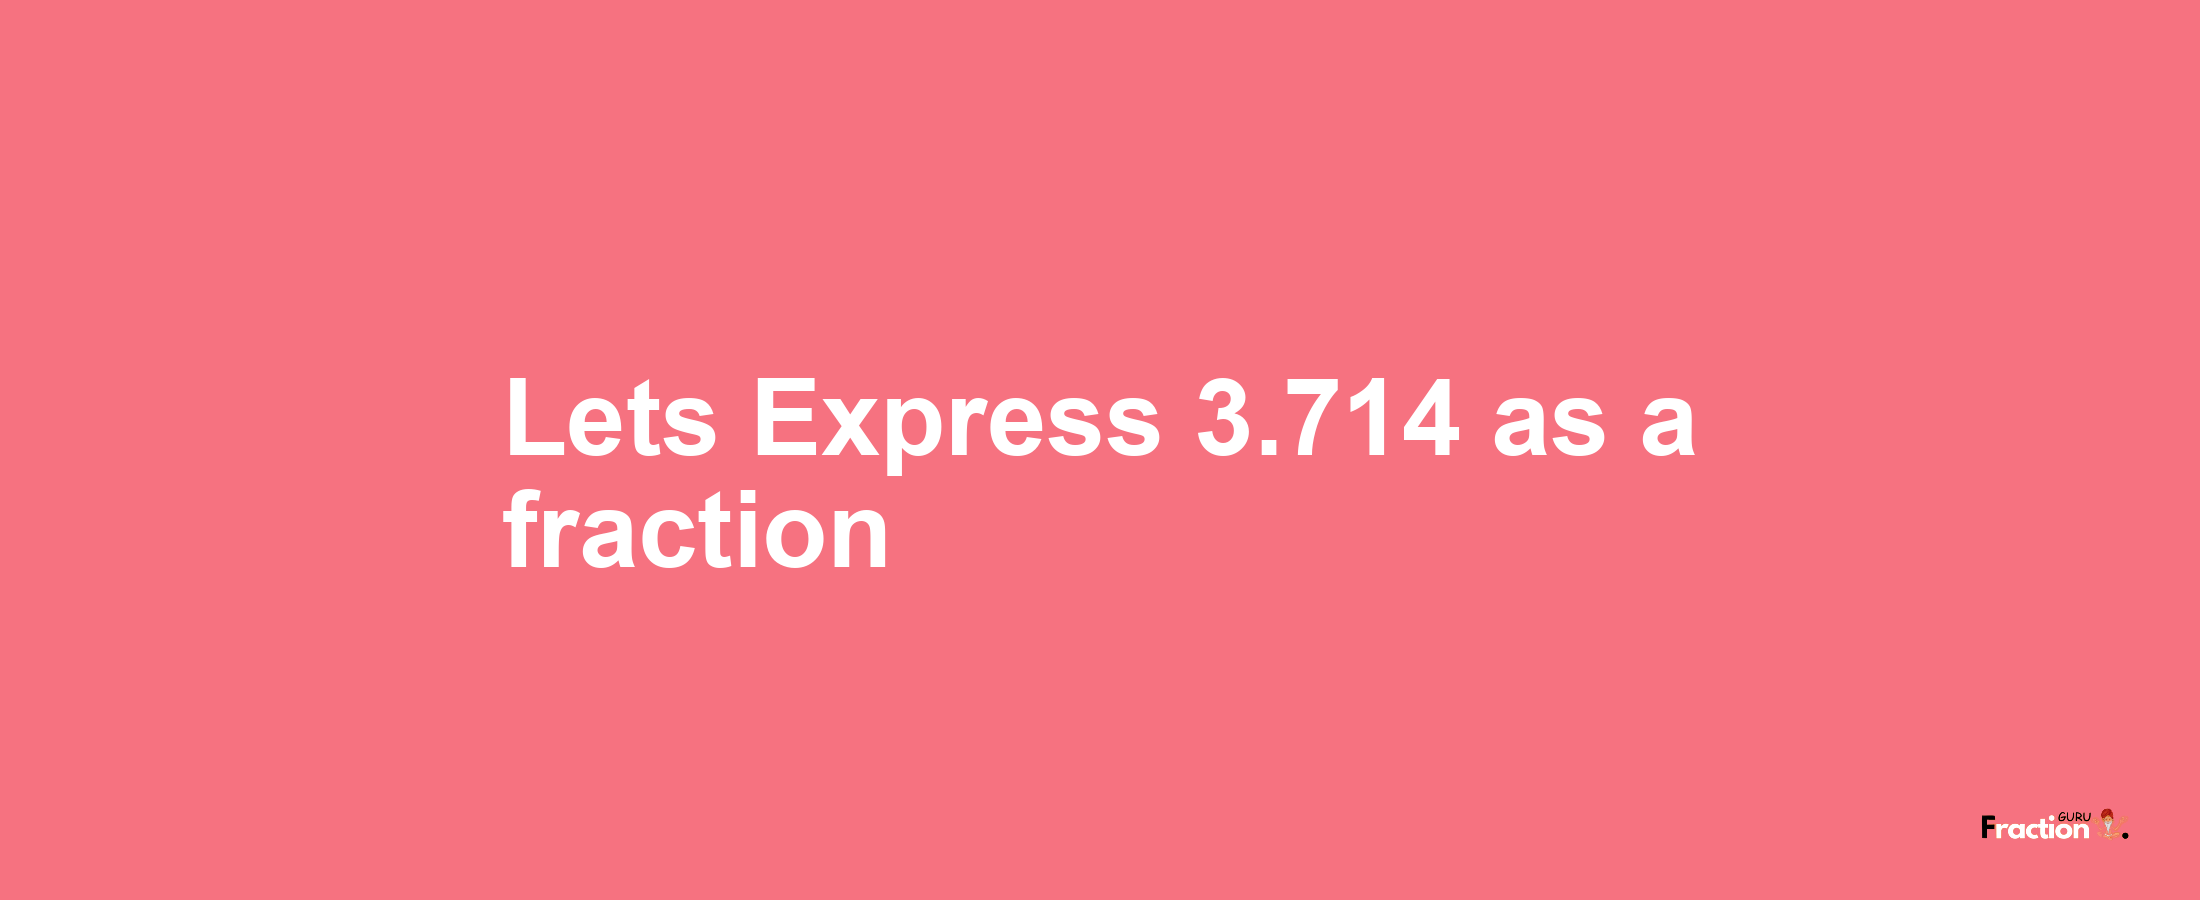 Lets Express 3.714 as afraction